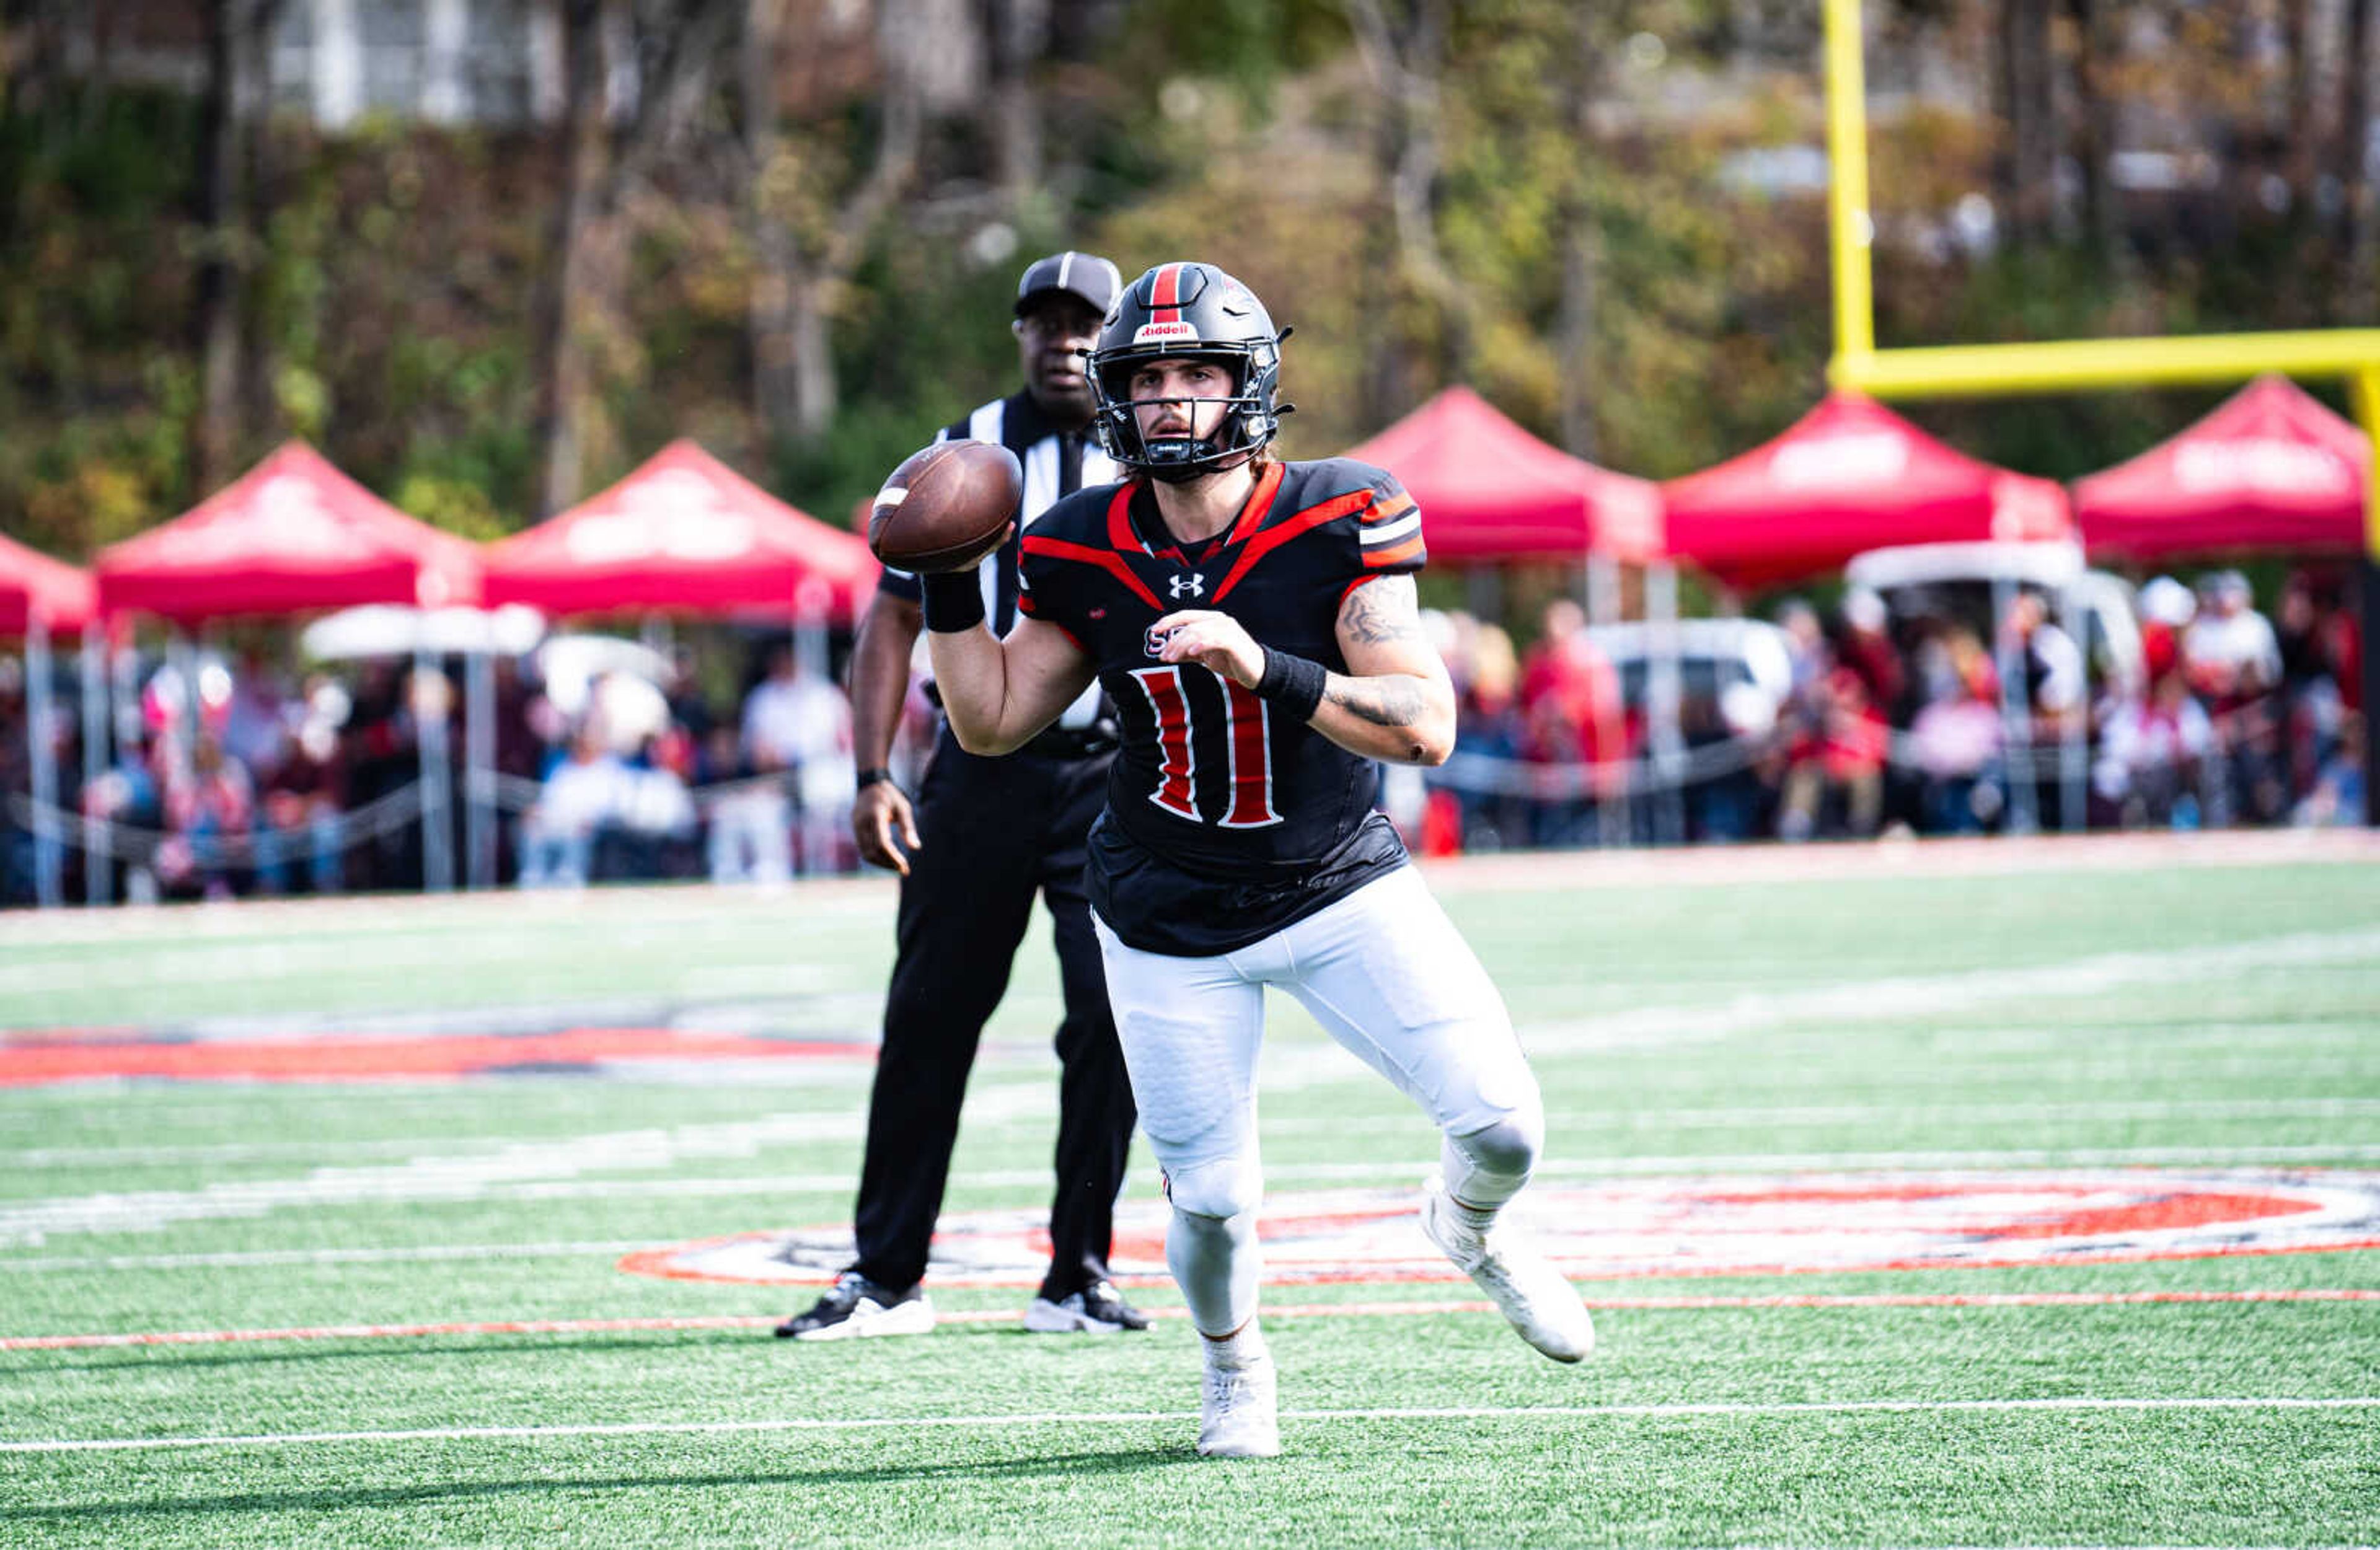 SEMO redshirt freshman quarterback (11) Patrick Heitert attempts a pass during SEMO's 21-20 loss against Robert Morris on Nov. 4 at Houck Field. Heitert threw for 144 yards one touchdown and one interception.